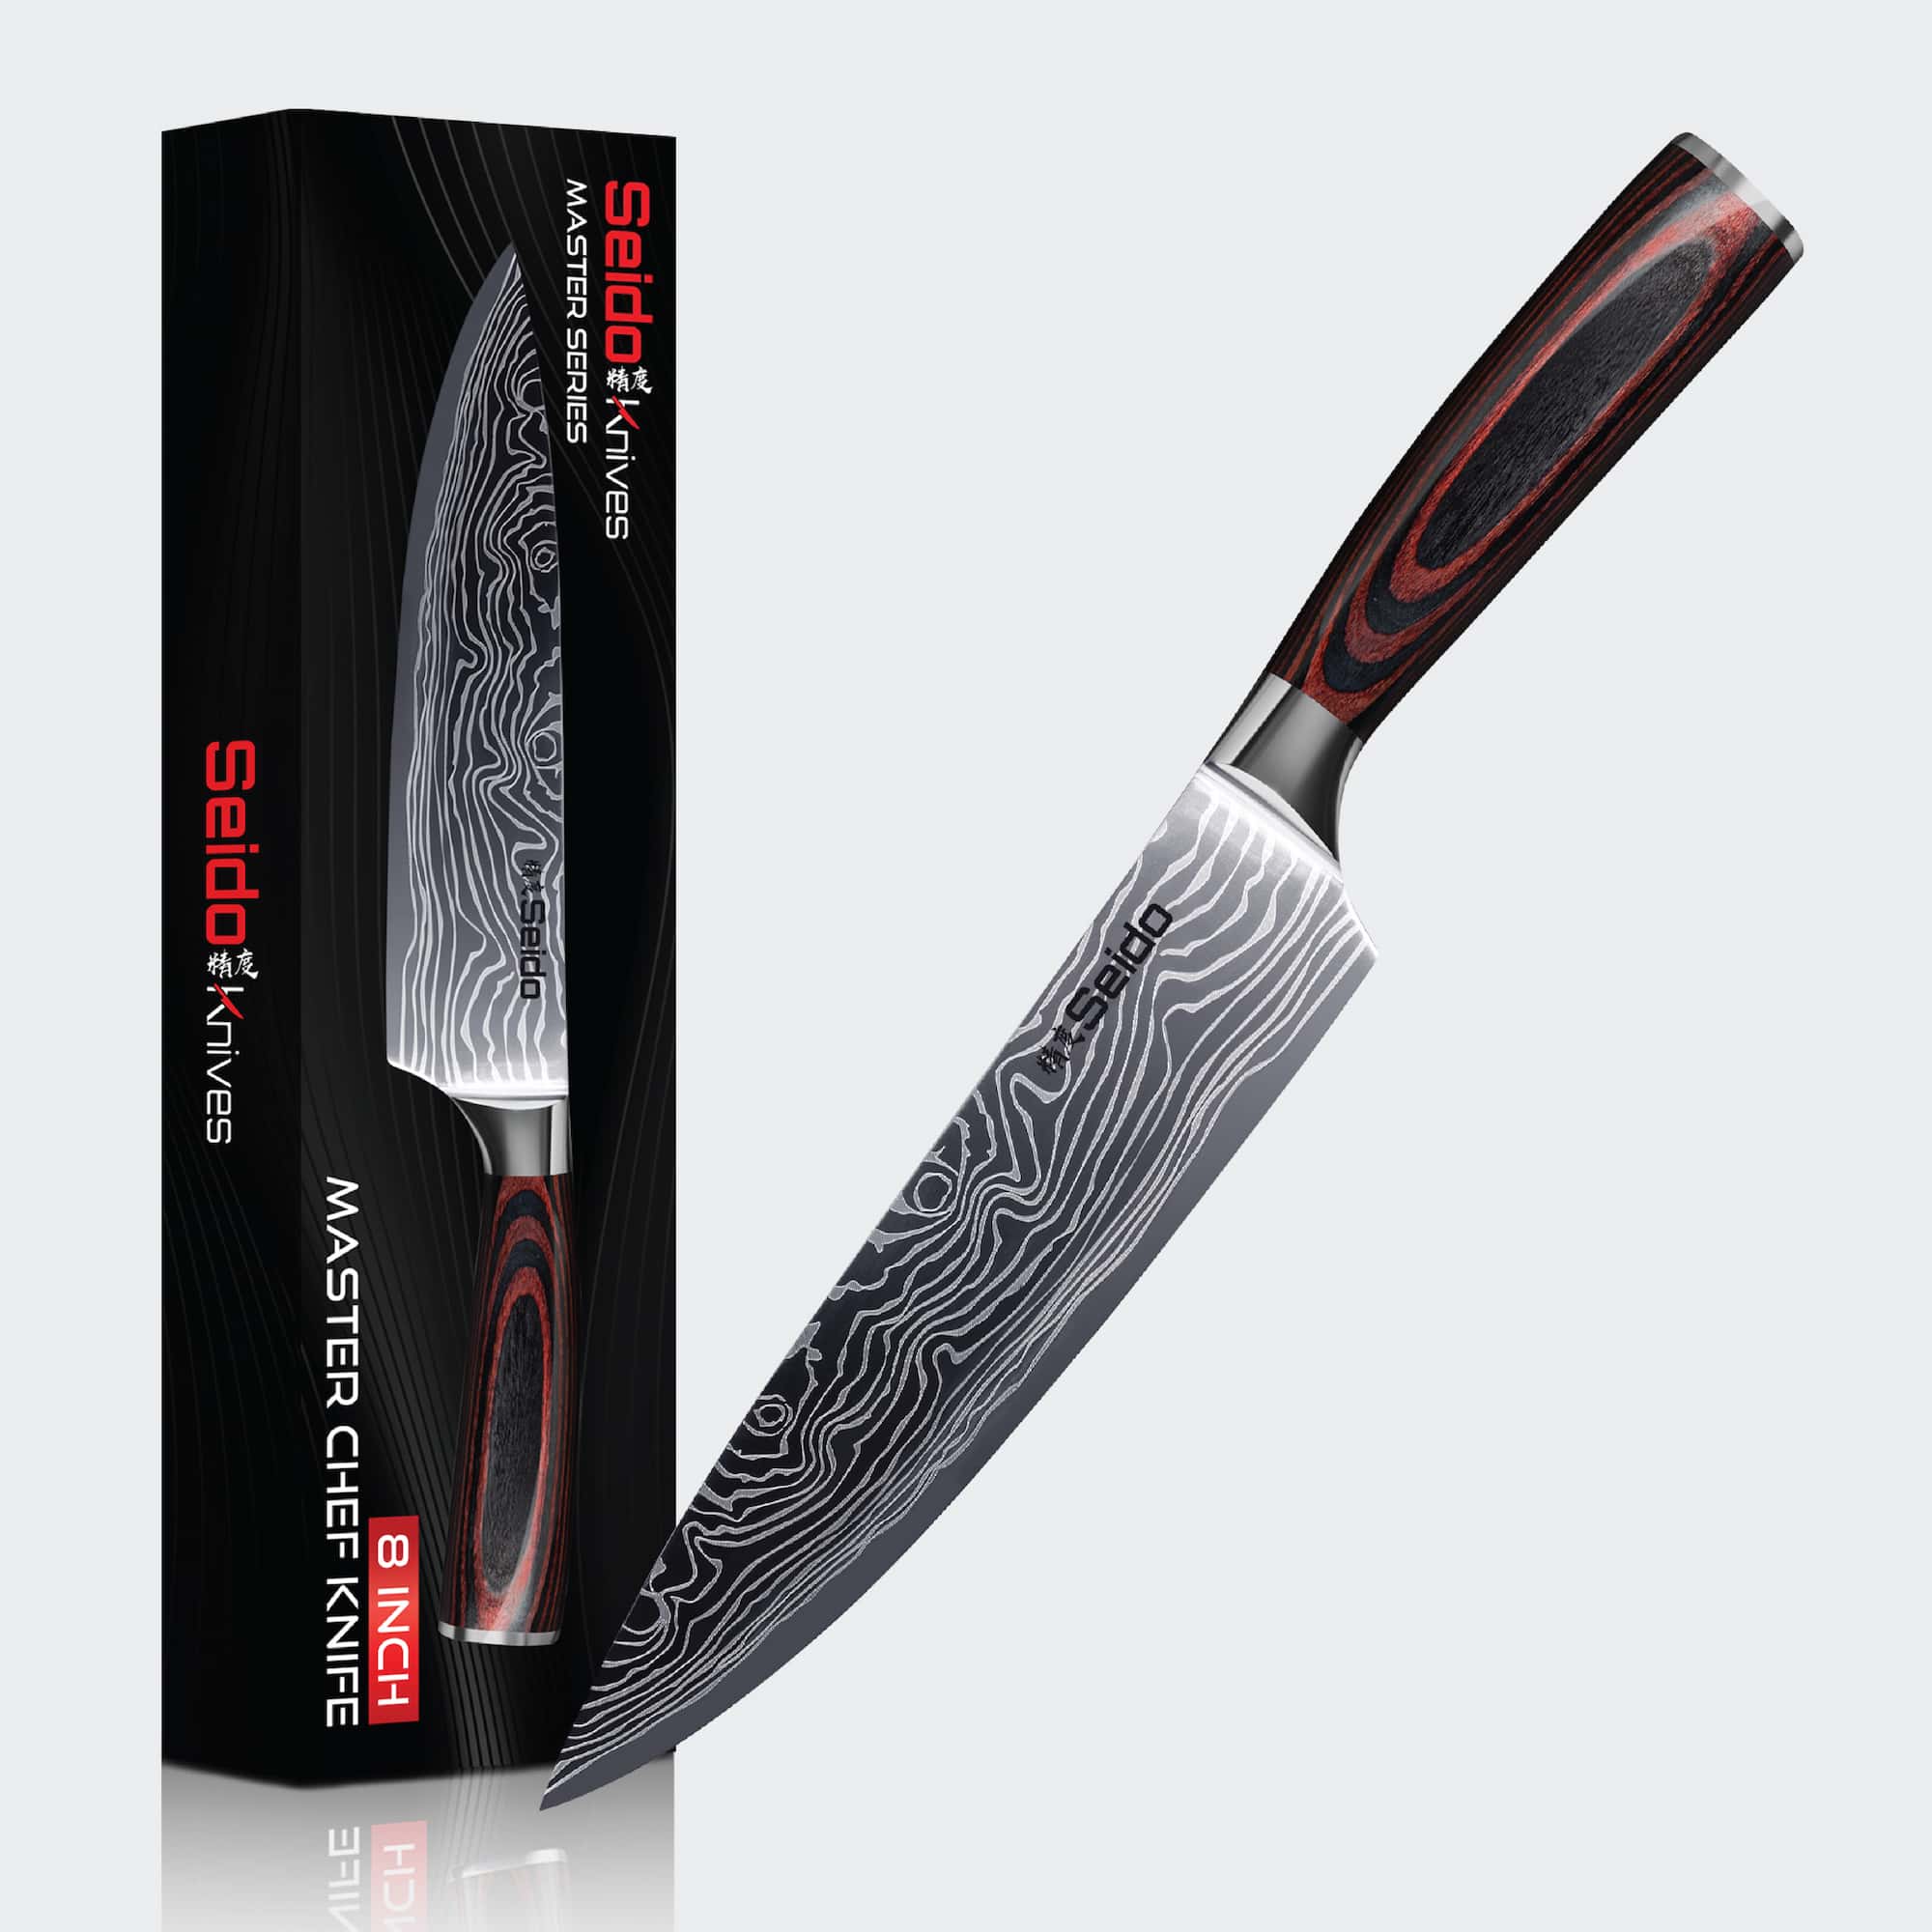 A sleek Japanese Master Chef Knife from Seido Knives, elegantly presented in a black seido gift box.